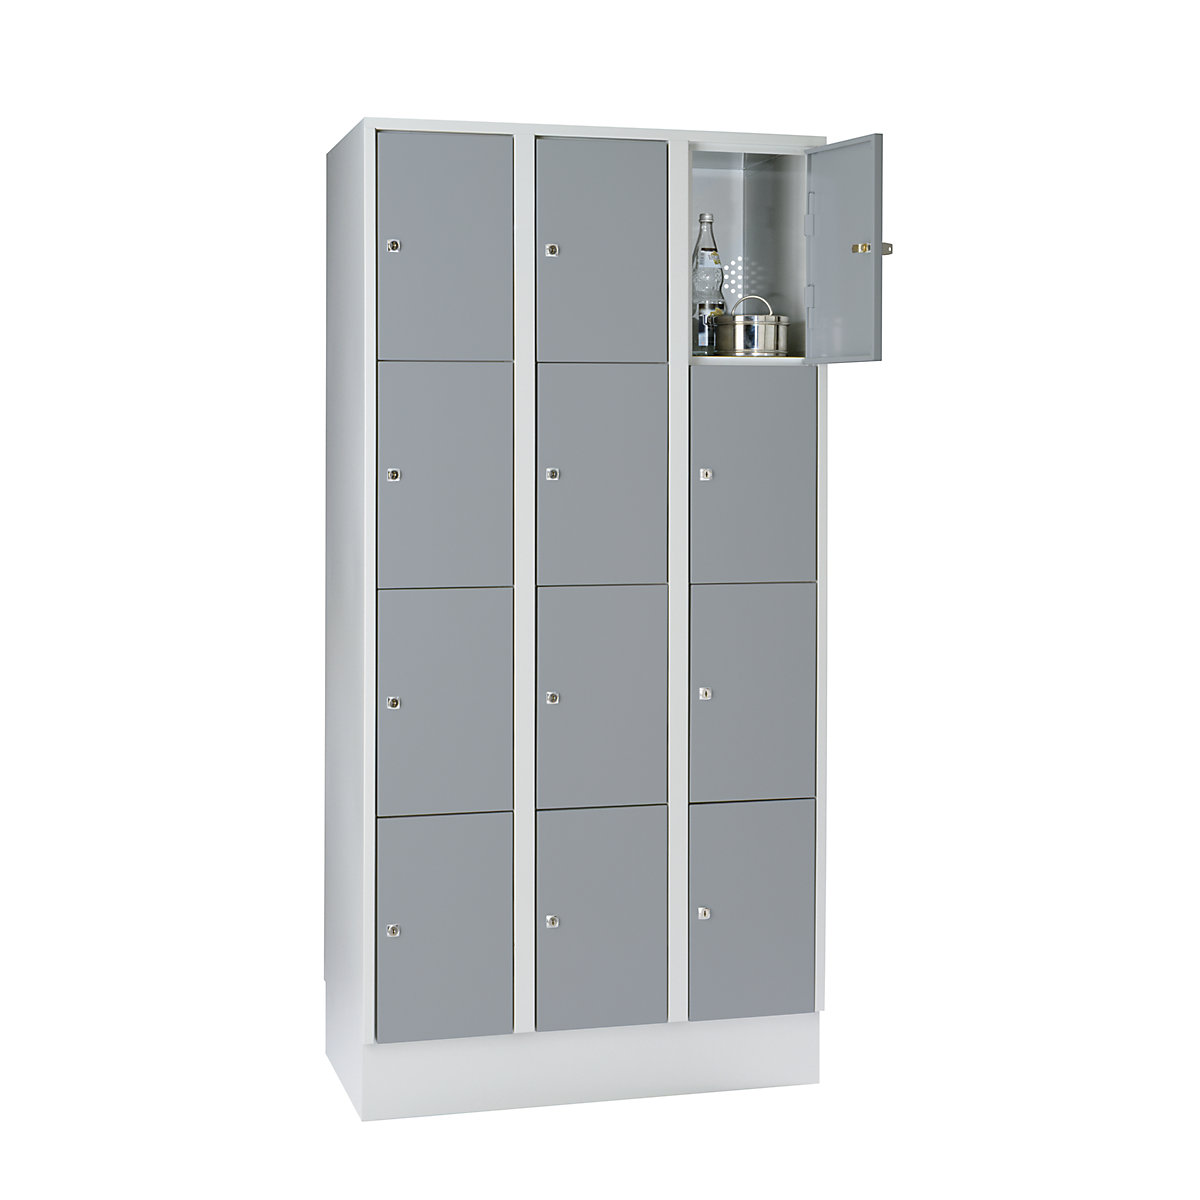 Clothes locker – Wolf, with plinth, 12 compartments, 300 mm, light grey / silver grey-4